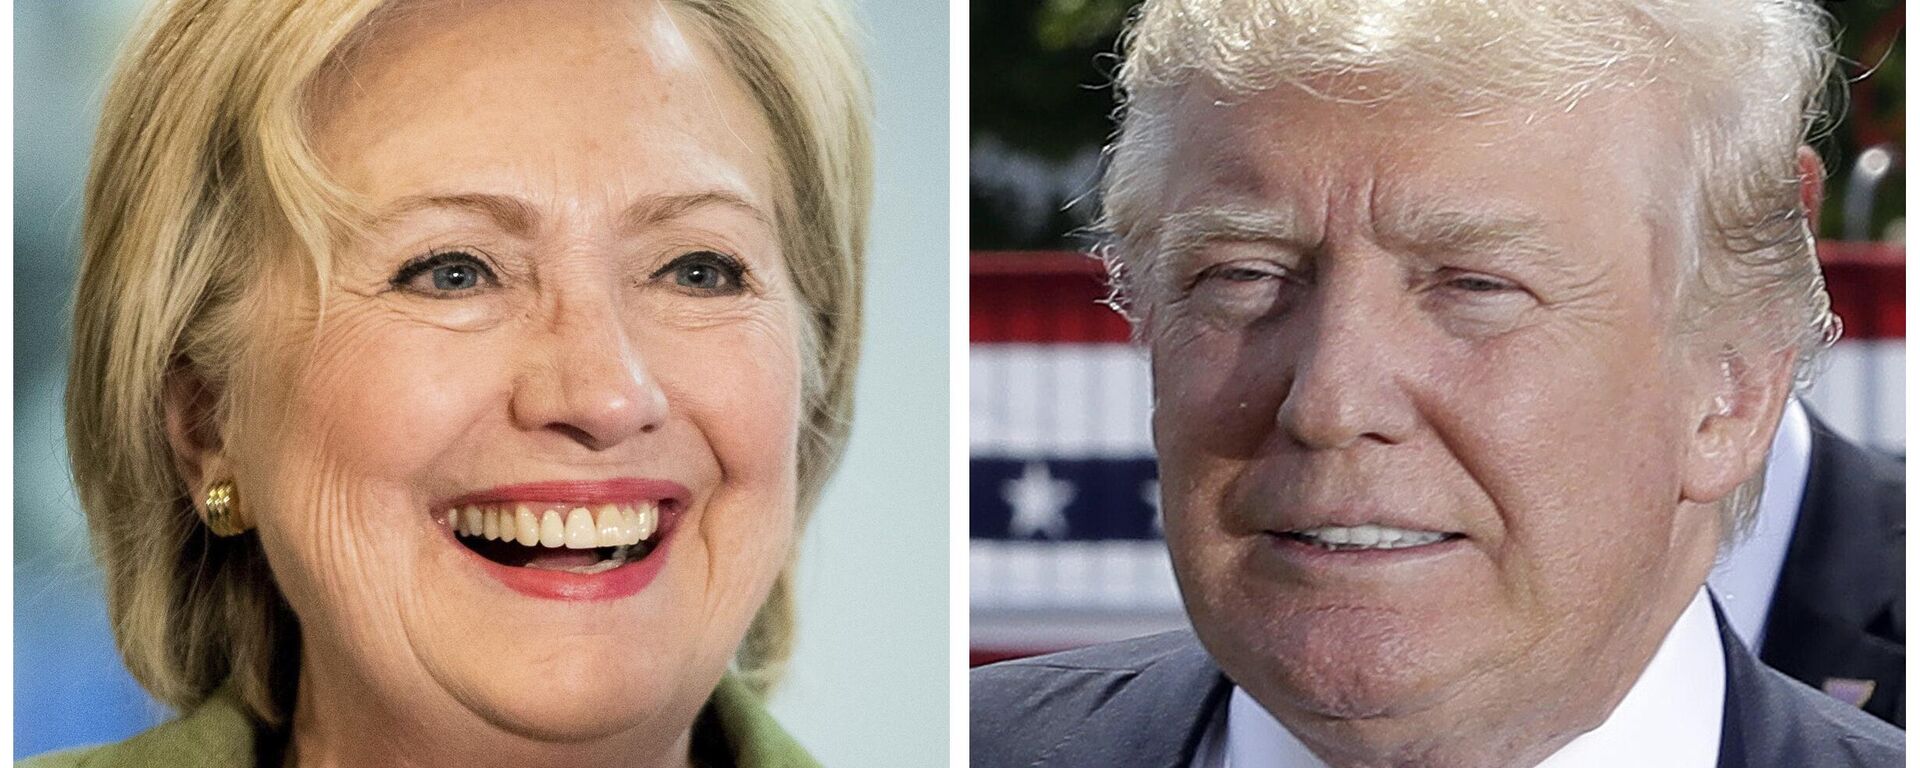 Democratic presidential candidate Hillary Clinton, left, and Republican presidential candidate Donald Trump in these 2016 file photos - Sputnik International, 1920, 15.02.2024